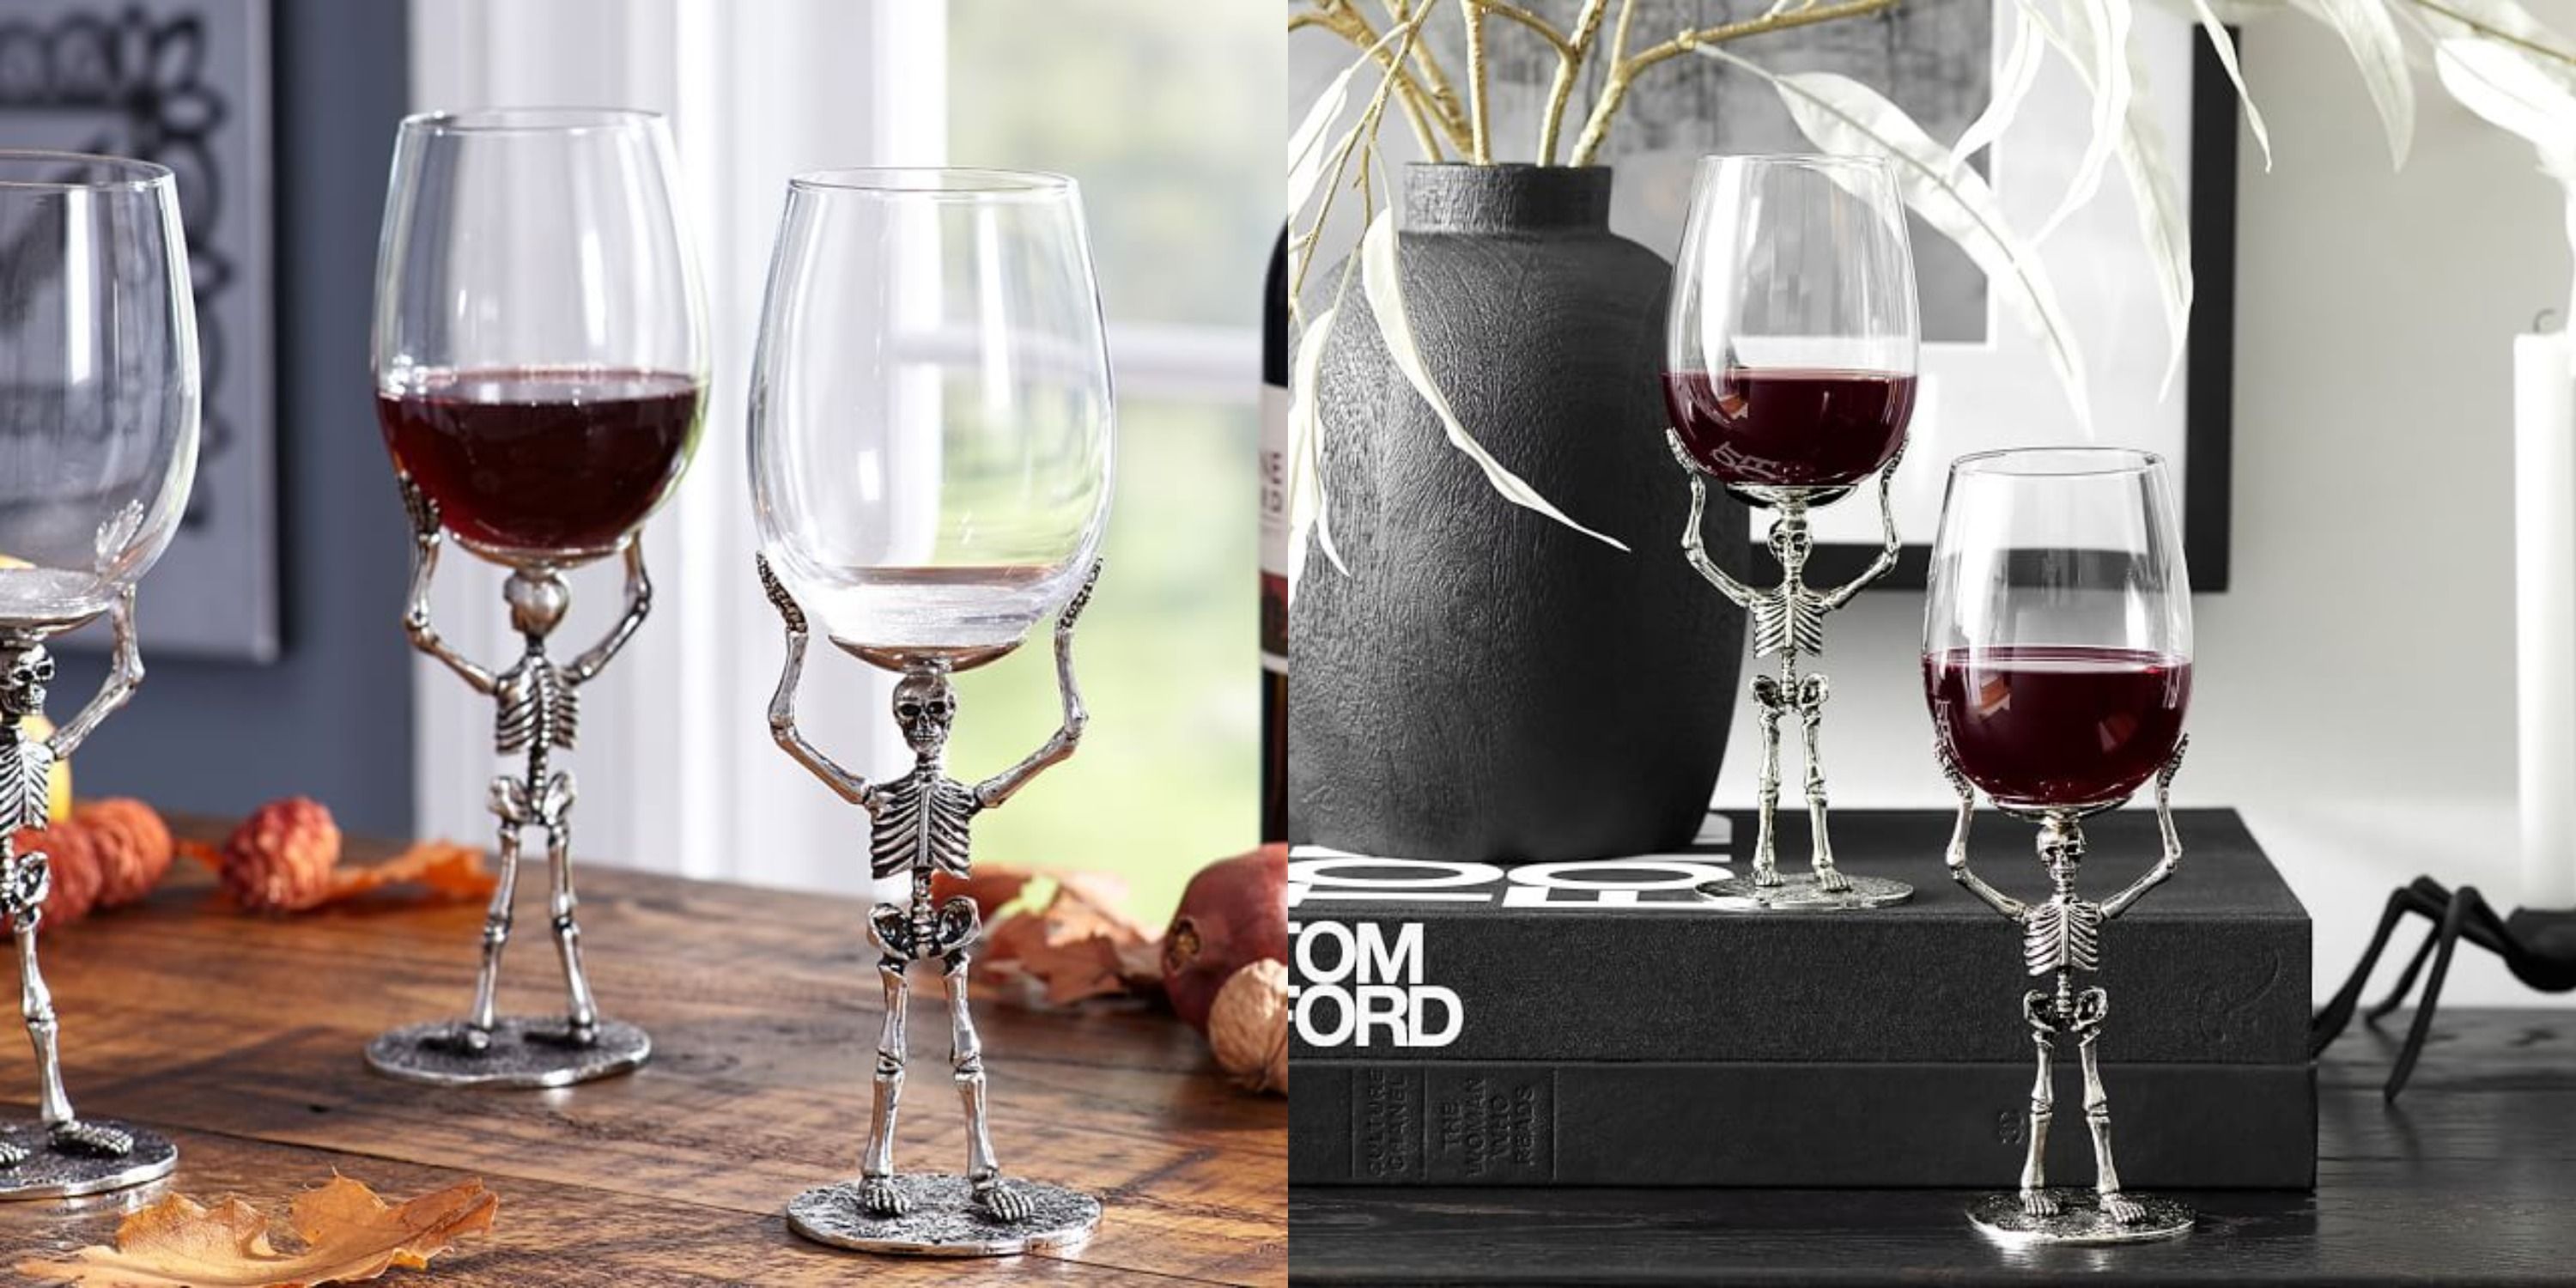 Pottery Barn Is Selling Wine Glasses Held Up By Skeletons